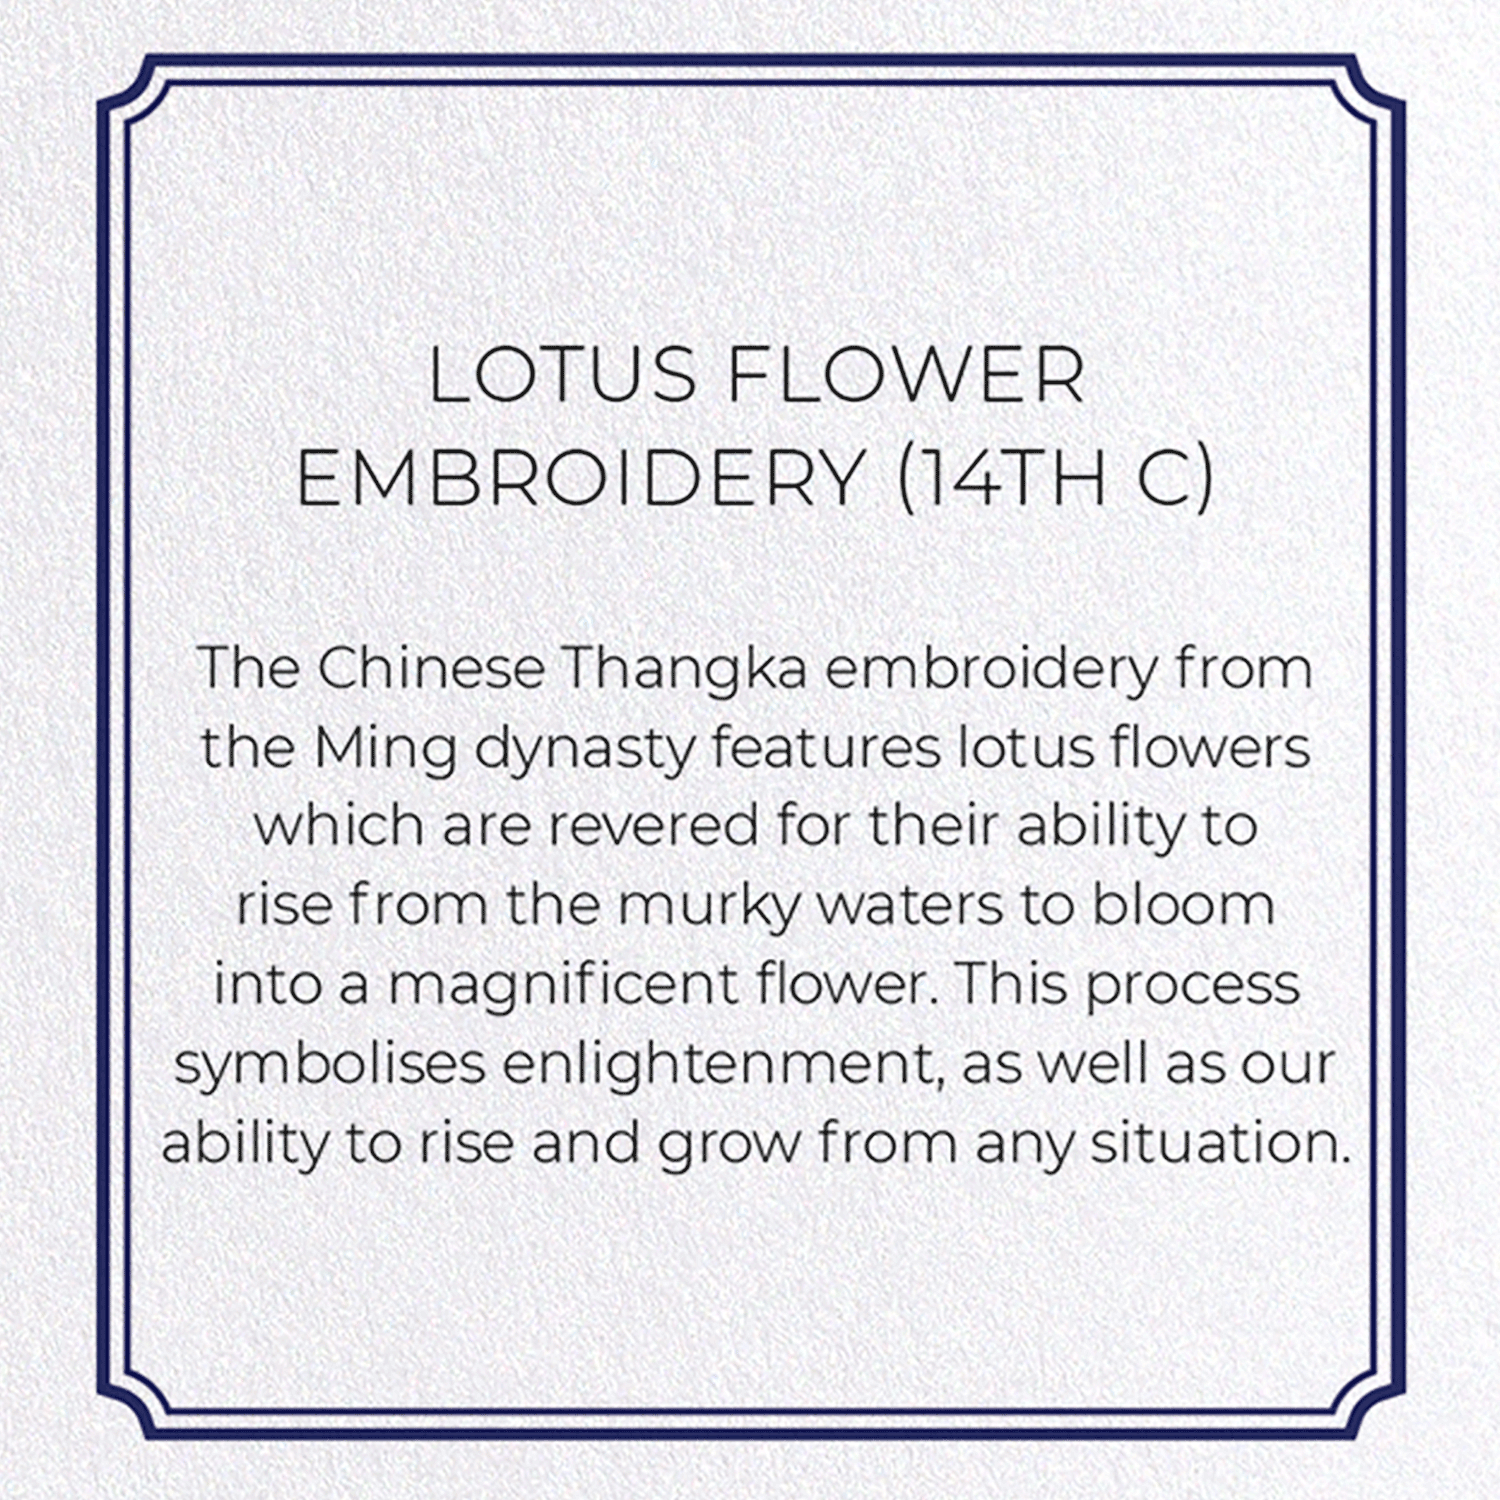 LOTUS FLOWER EMBROIDERY (14TH C): Pattern Greeting Card